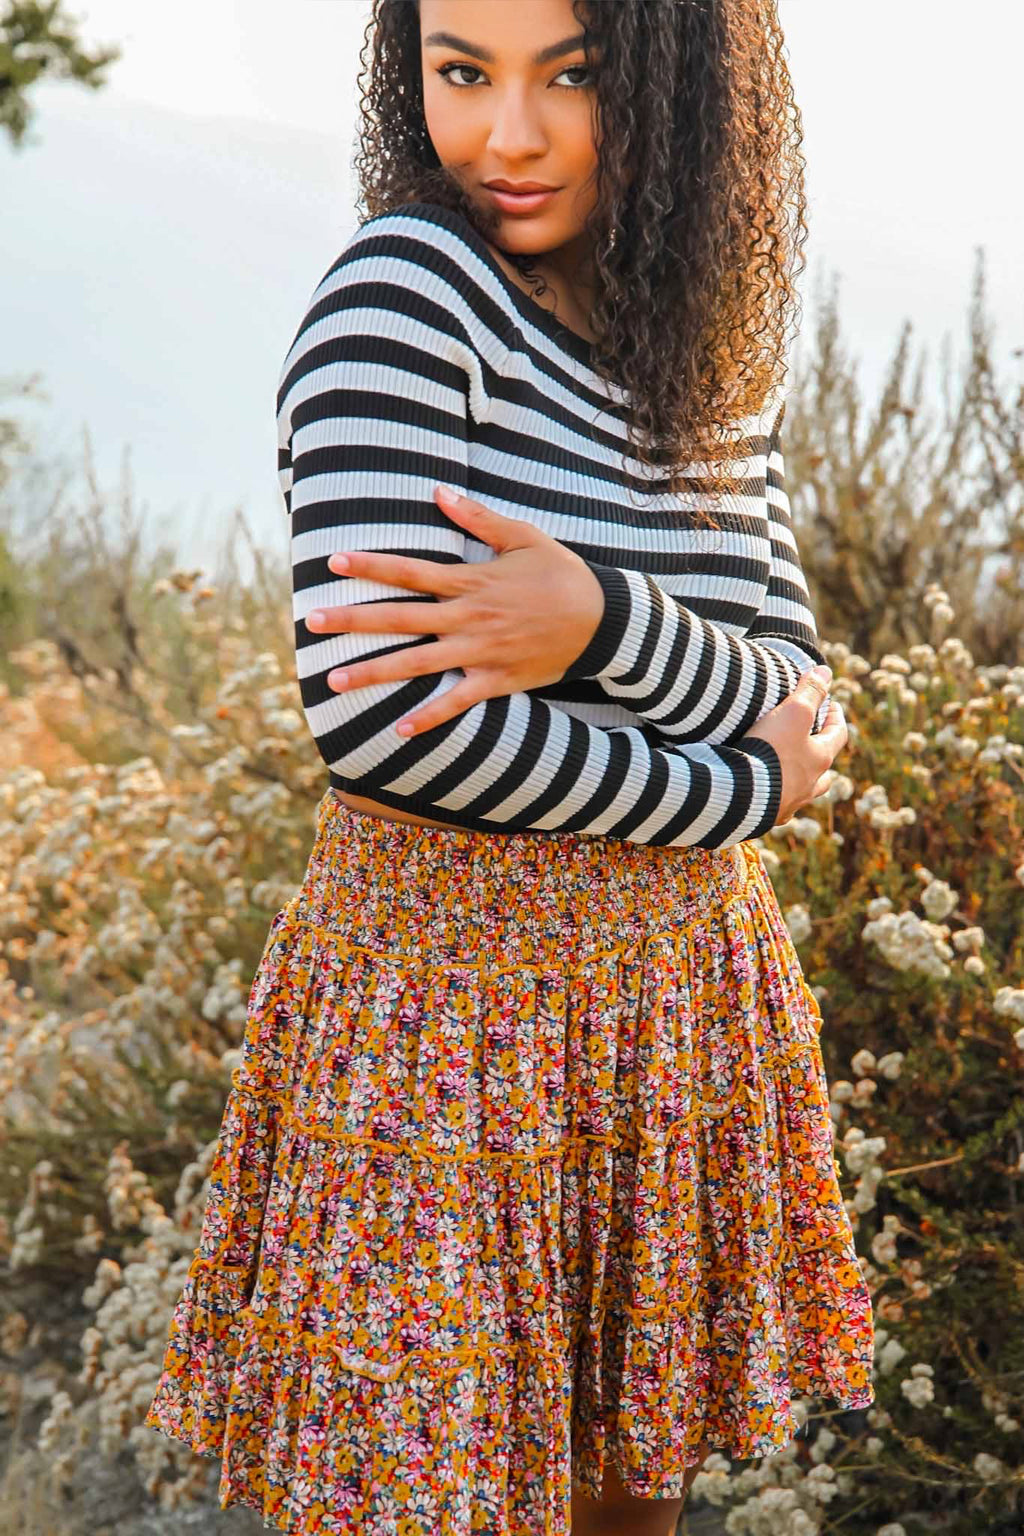 black and white striped crop top and ditsy floral skirt